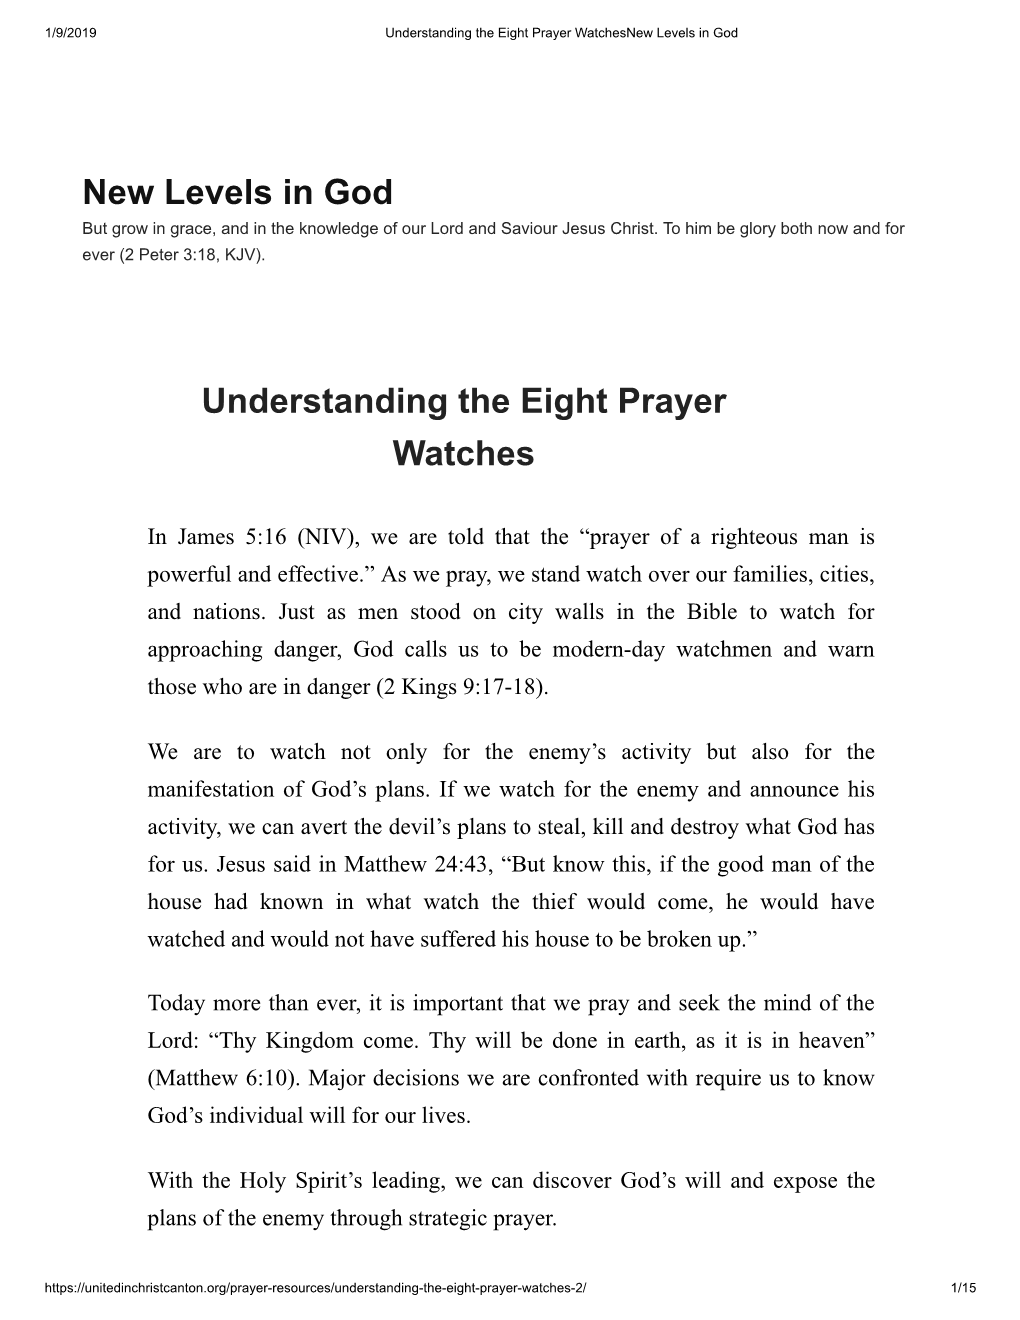 Understanding the Eight Prayer Watches New Levels In